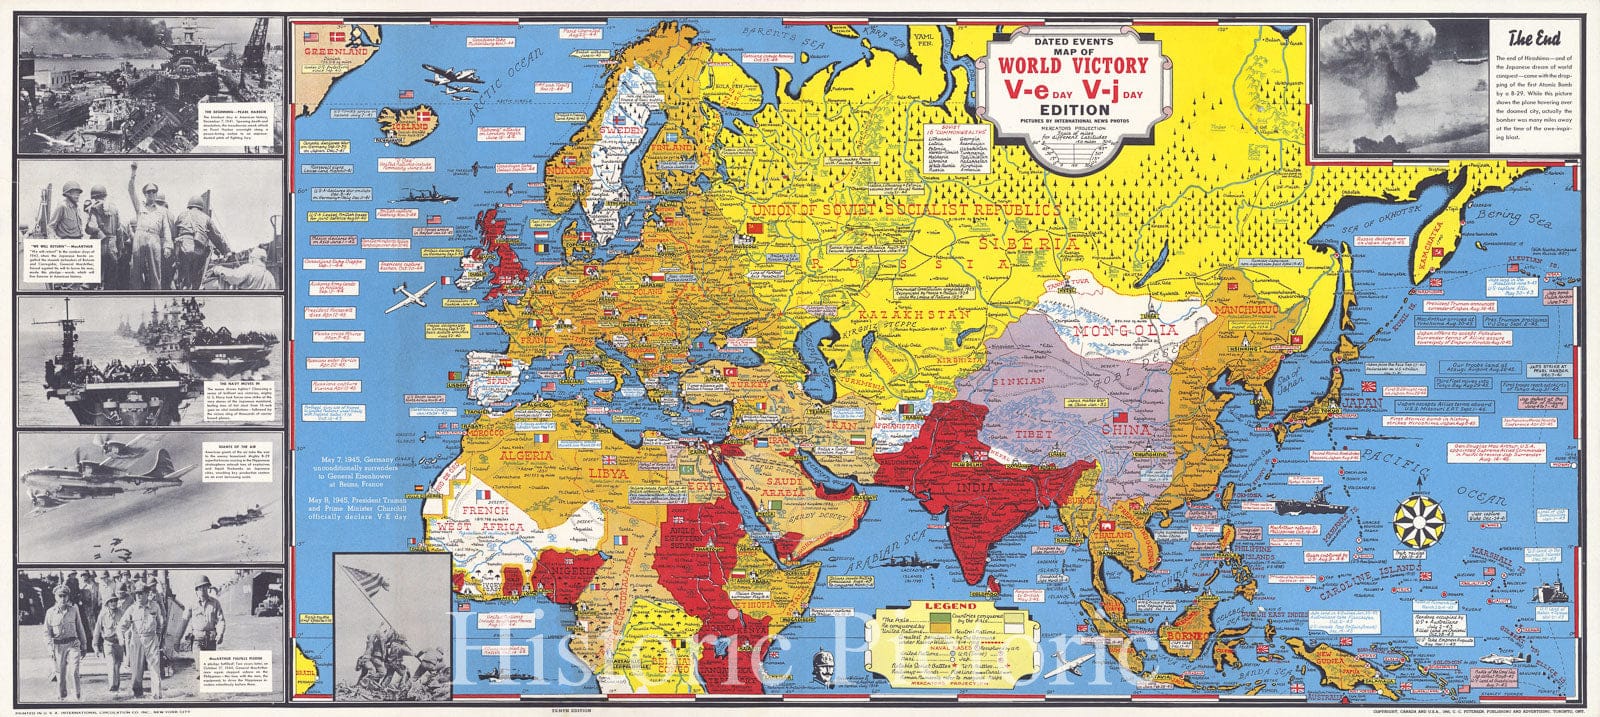 Historic Map - Dated Events Map of World War II Victory, 1945 - Vintage Wall Art